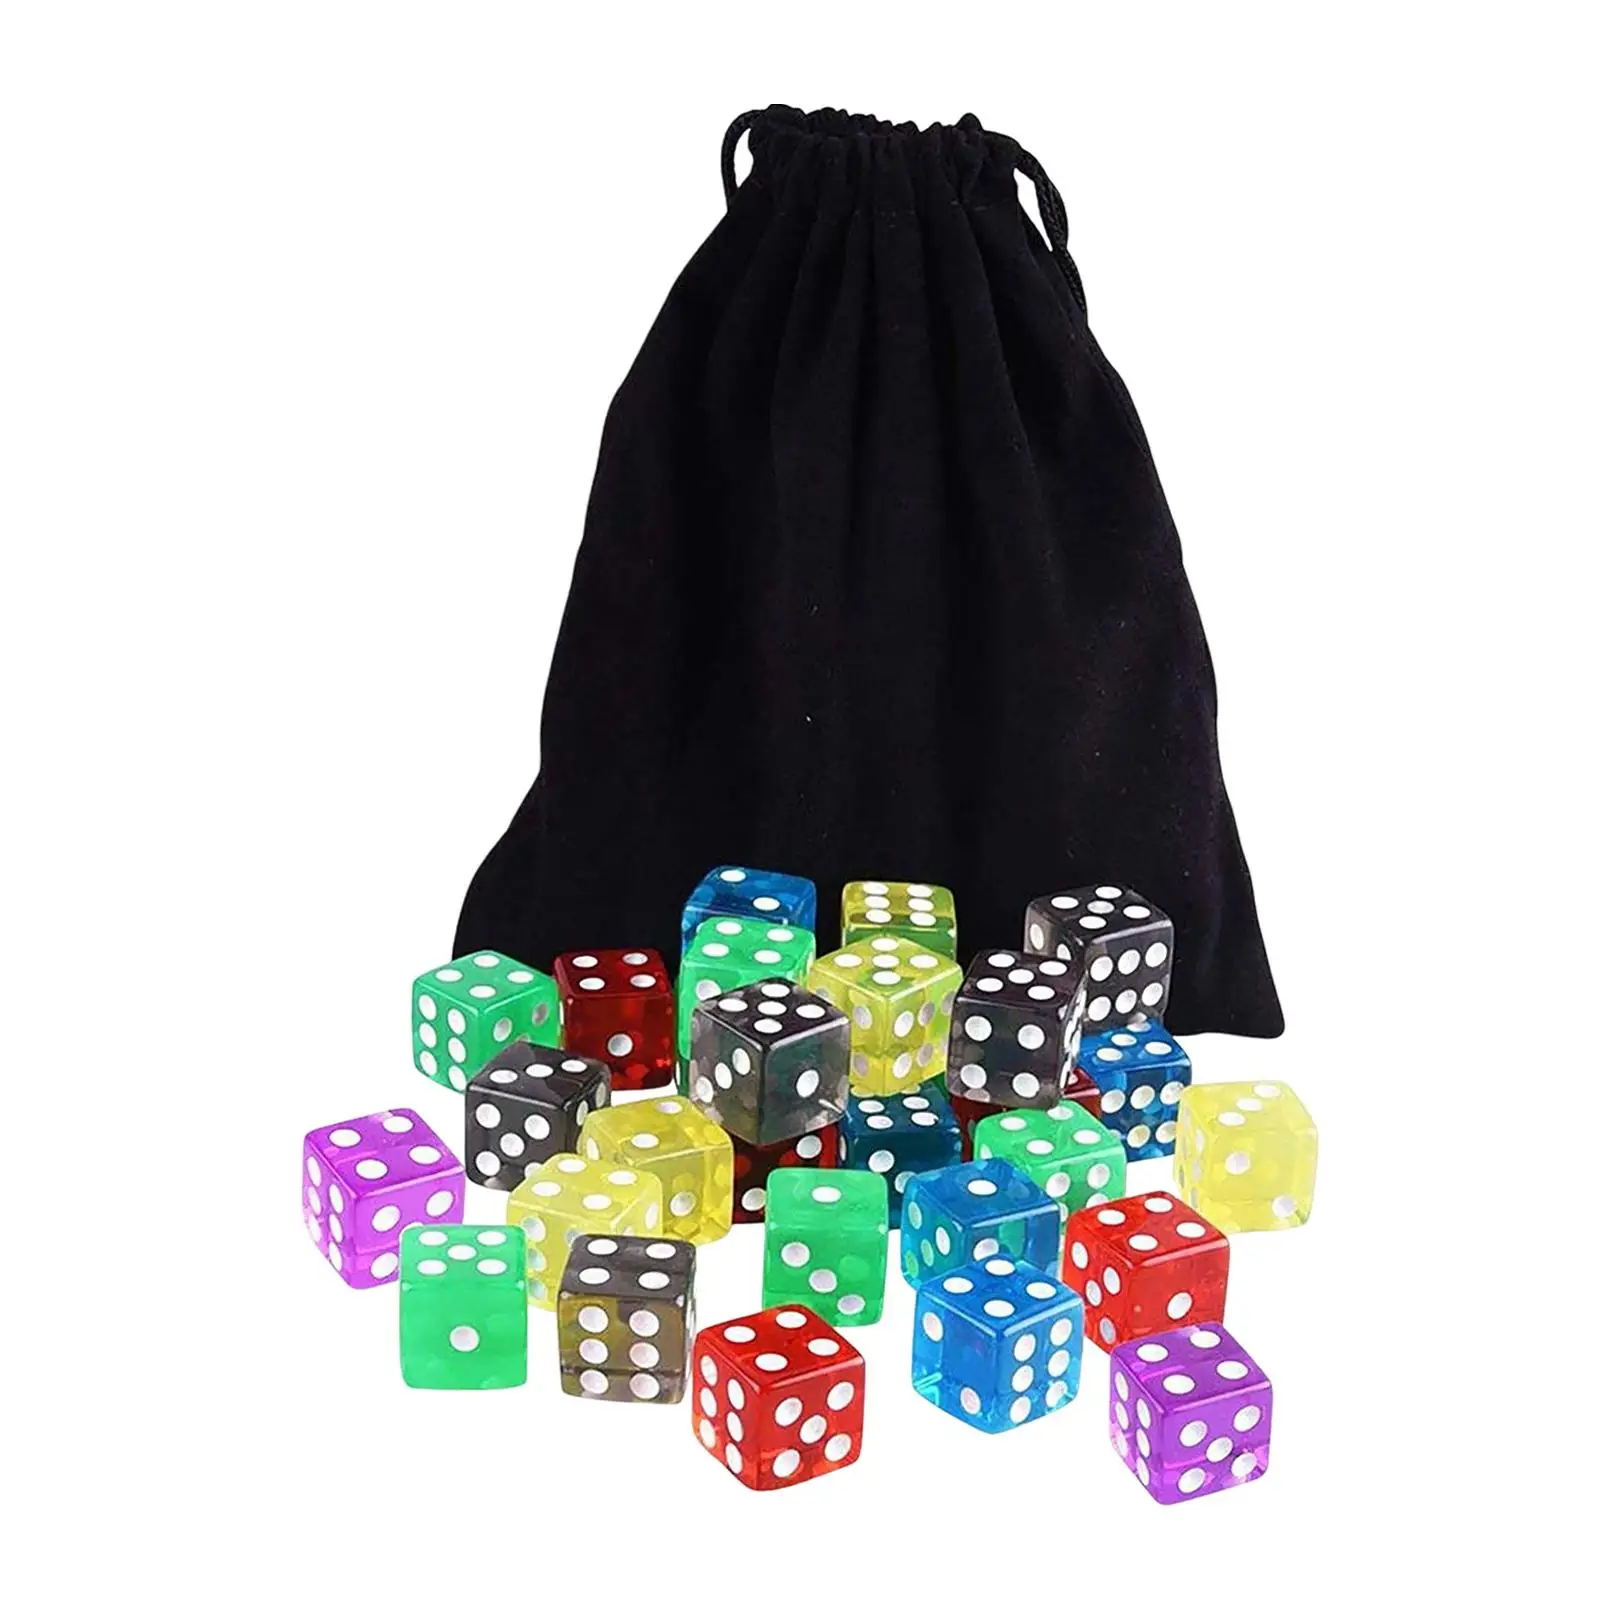 60Pcs 6 Sided Dice Set with Velvet Pouch for MTG Table Games 16mm Transparent Acrylic Dice